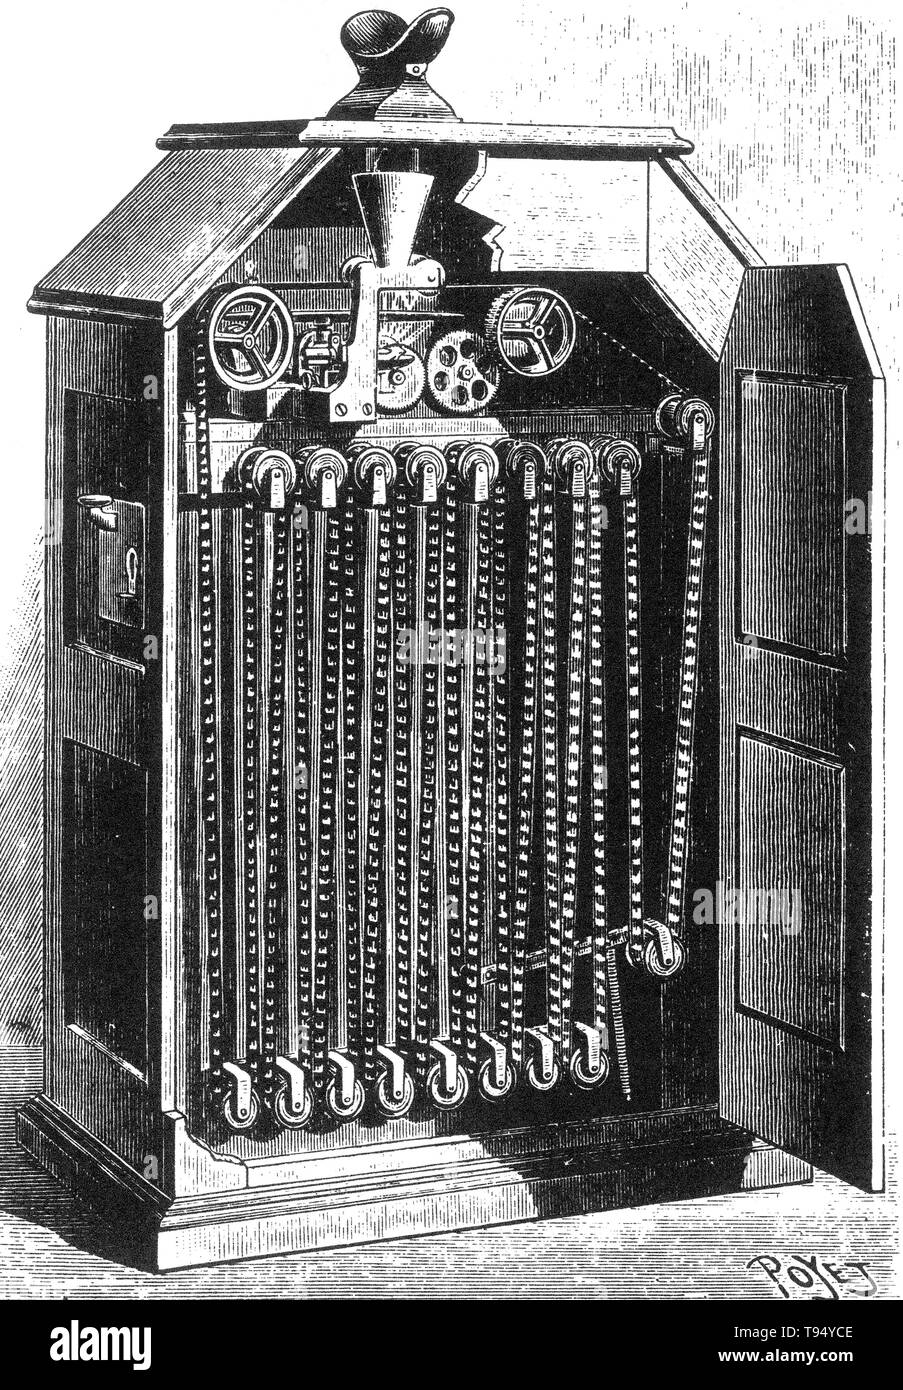 The Kinetoscope is an early motion picture exhibition device designed for films to be viewed by one individual at a time through a peephole viewer window at the top of the device. The Kinetoscope was not a movie projector but introduced the basic approach that would become the standard for all cinematic projection before the advent of video, by creating the illusion of movement by conveying a strip of perforated film bearing sequential images over a light source with a high-speed shutter. Stock Photo